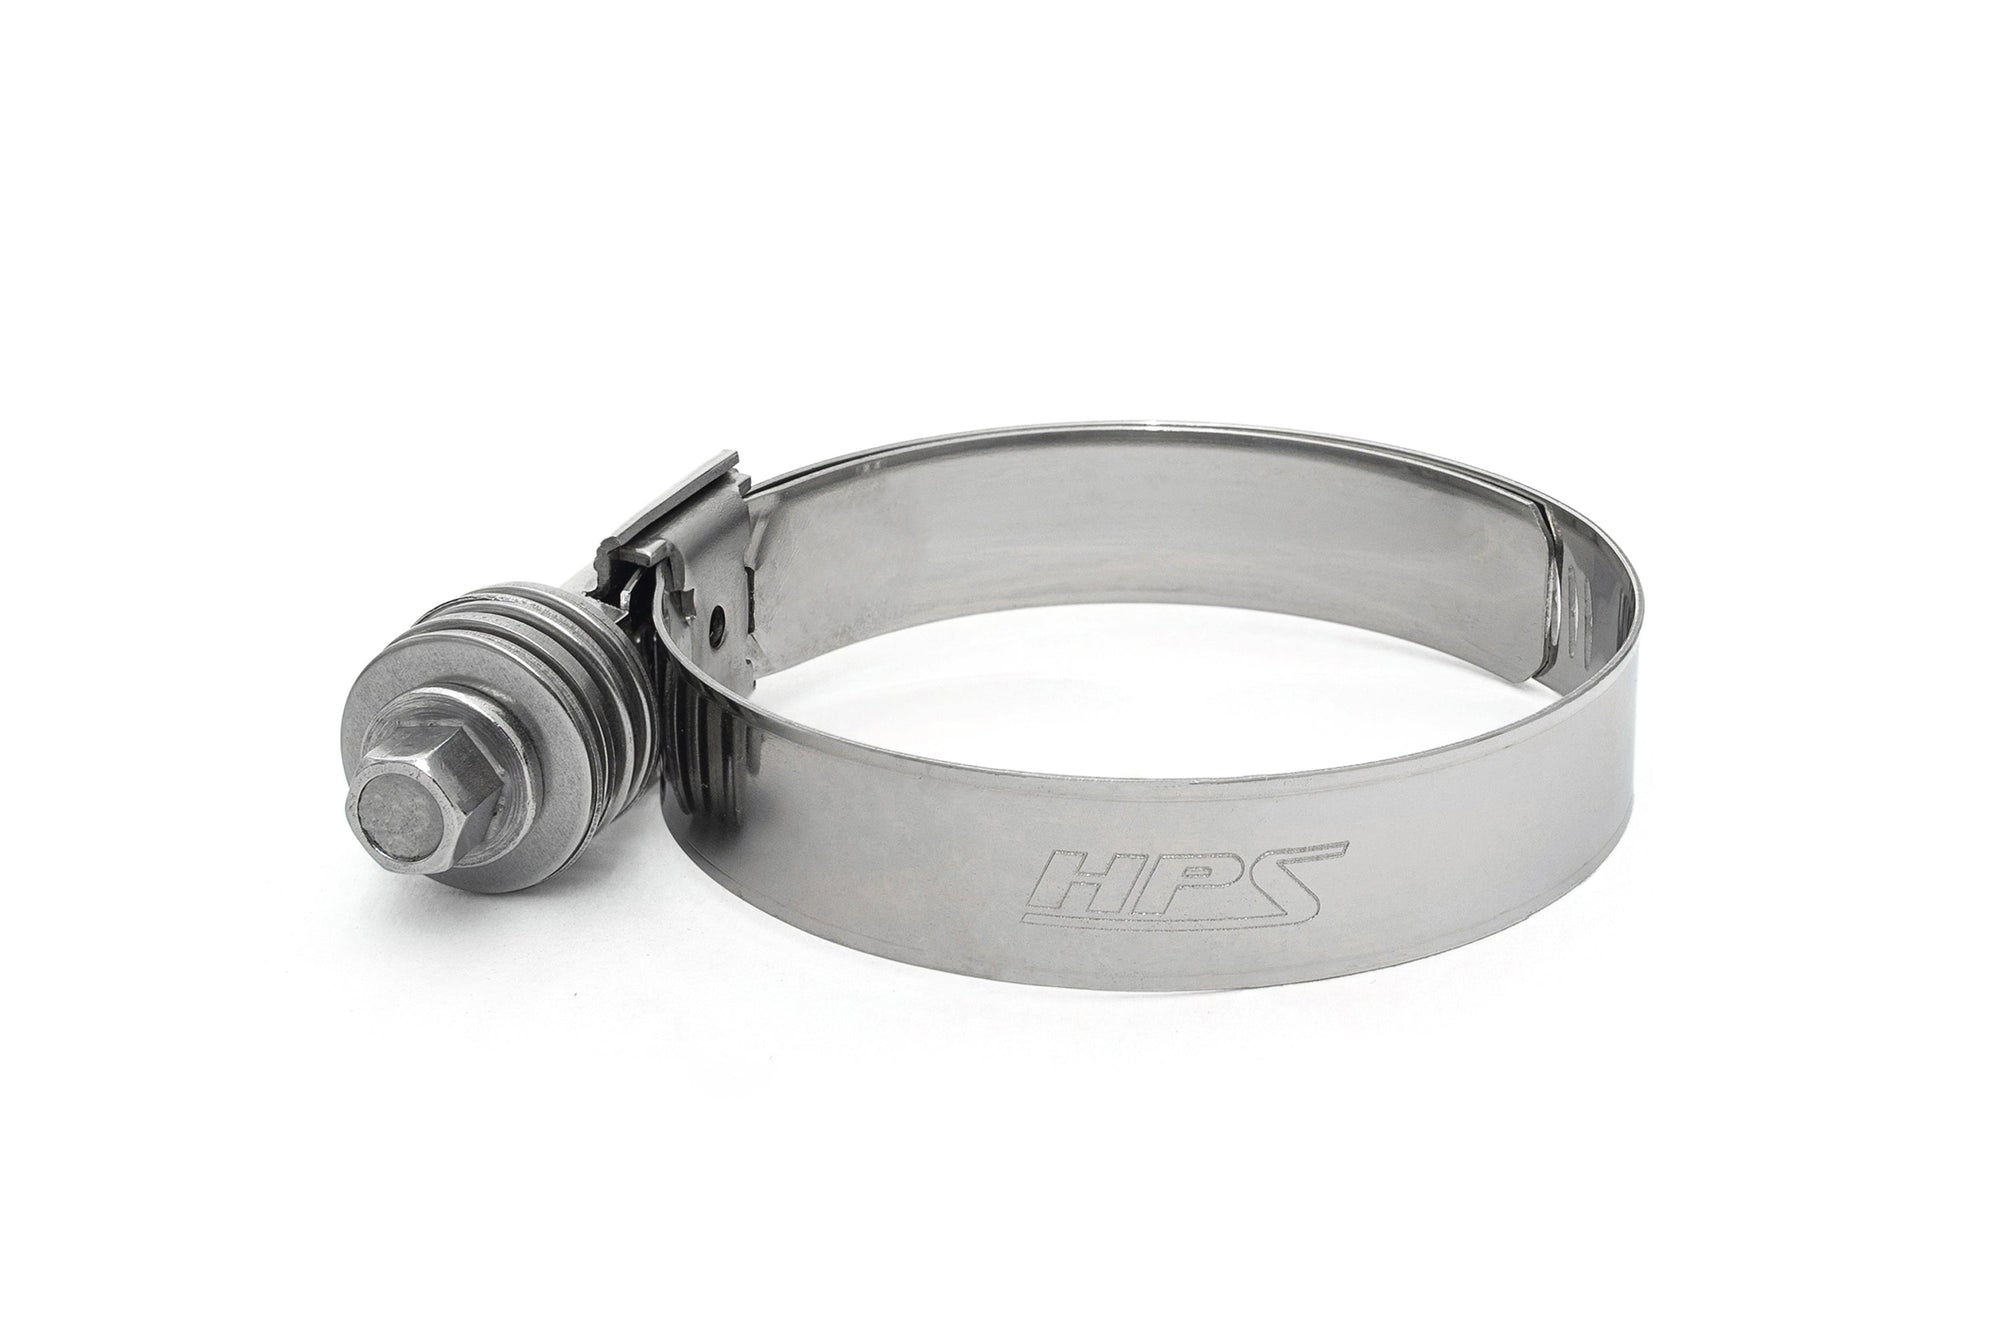 HPS Stainless Steel Heavy Duty Constant Tension Hose Clamp CTHD-562 fits 5" inch silicone hose charge air intake turbo cac intercooler pipe